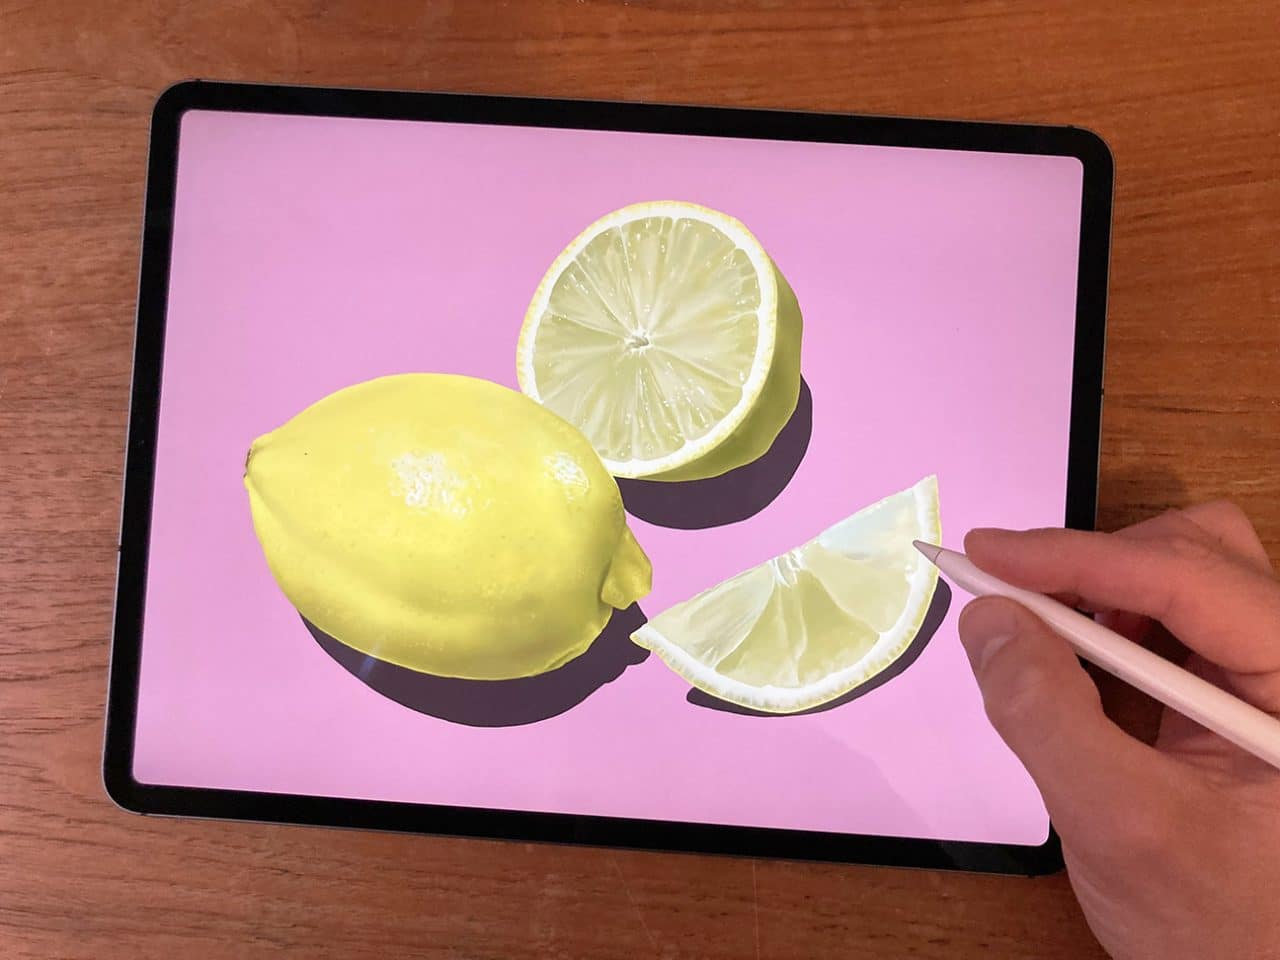 Learn the process of creating a digital lemon drawing with Procreate on iPad Pro